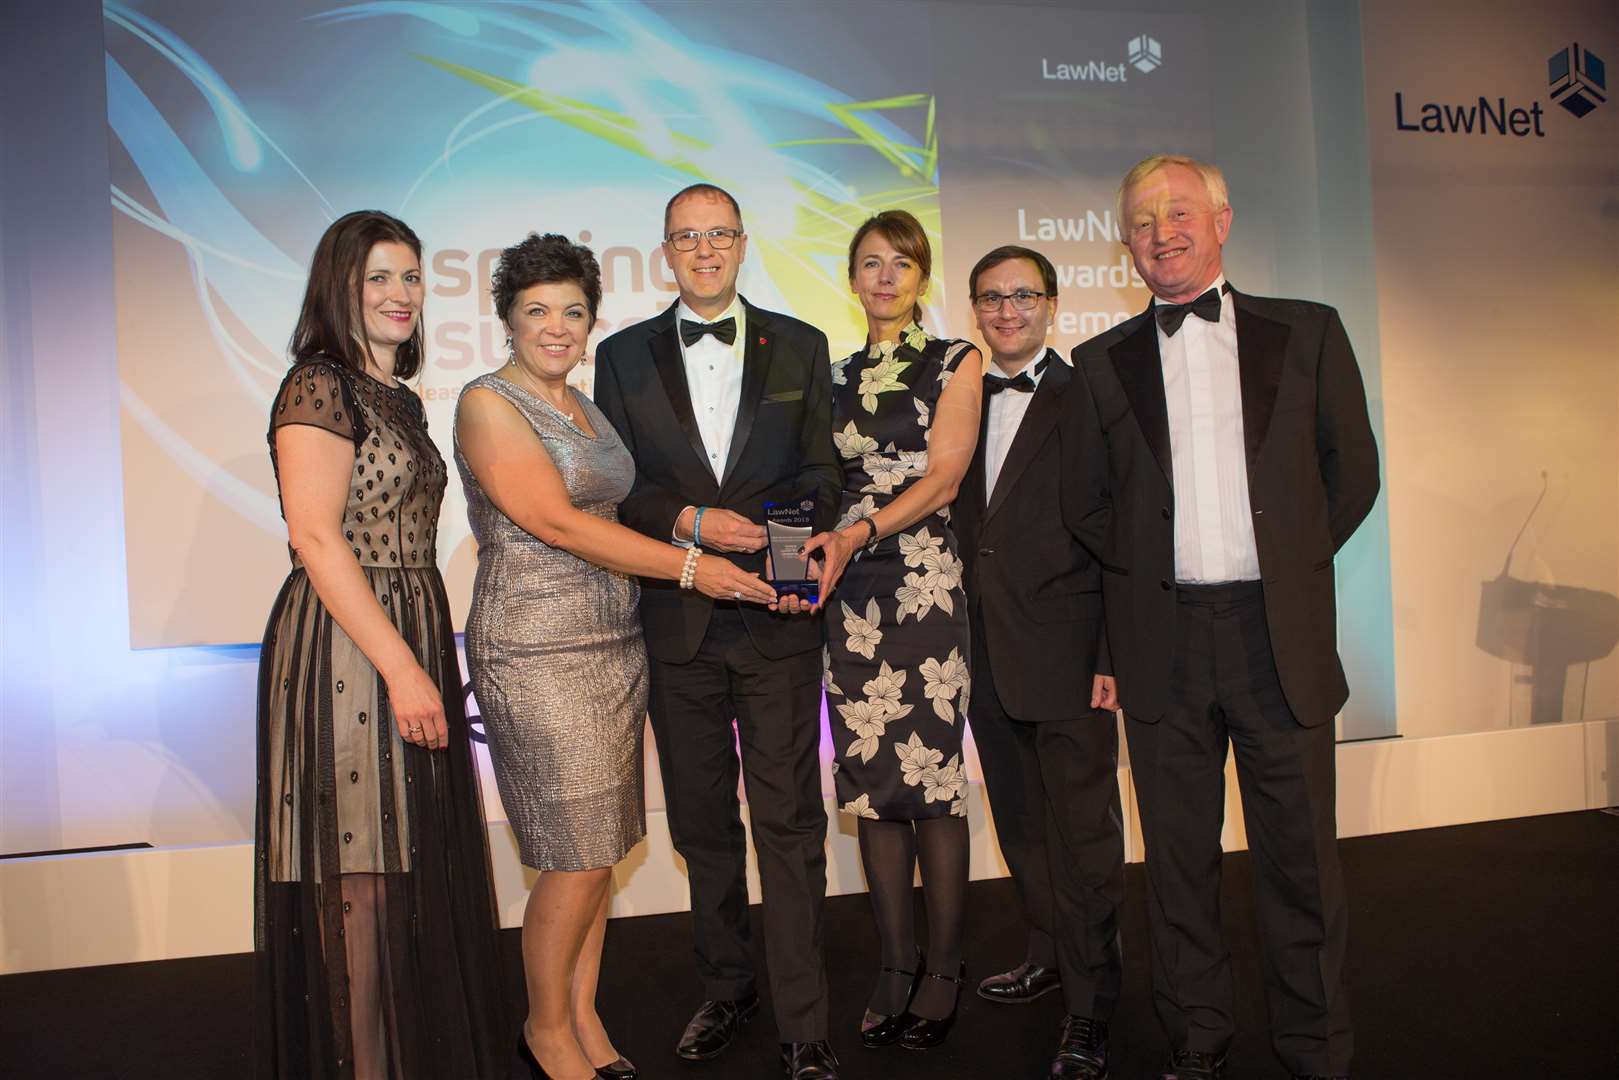 The team at Clarkson Wright & Jakes picked up the Best Community Contribution prize at the LawNet awards